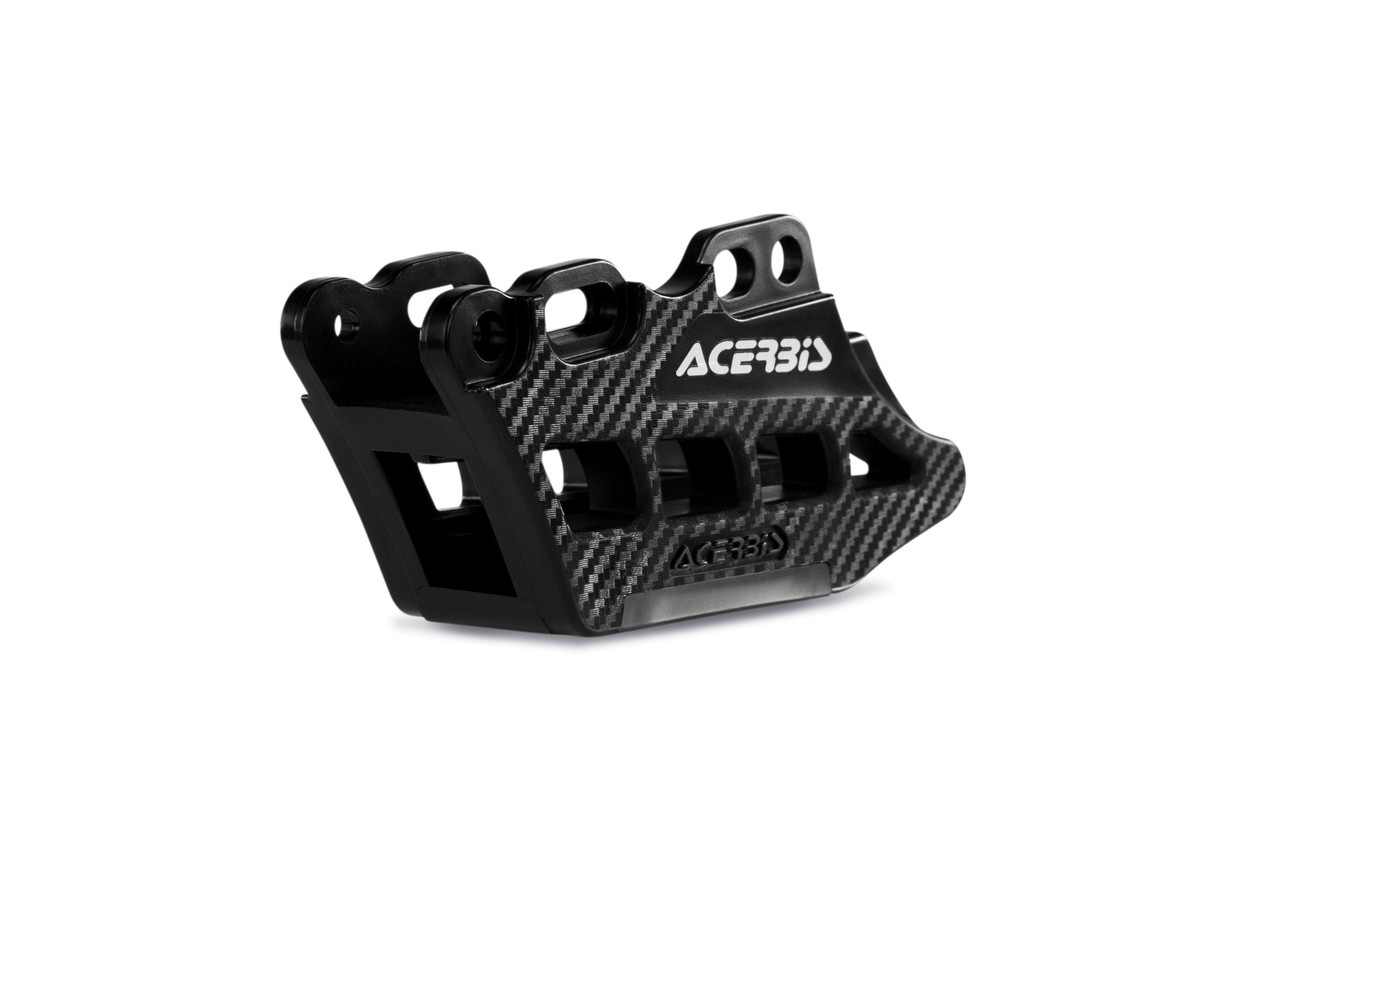 Acerbis Chain Guide Block 2.0 Blue for Yamaha YZ250X 2016-2018 